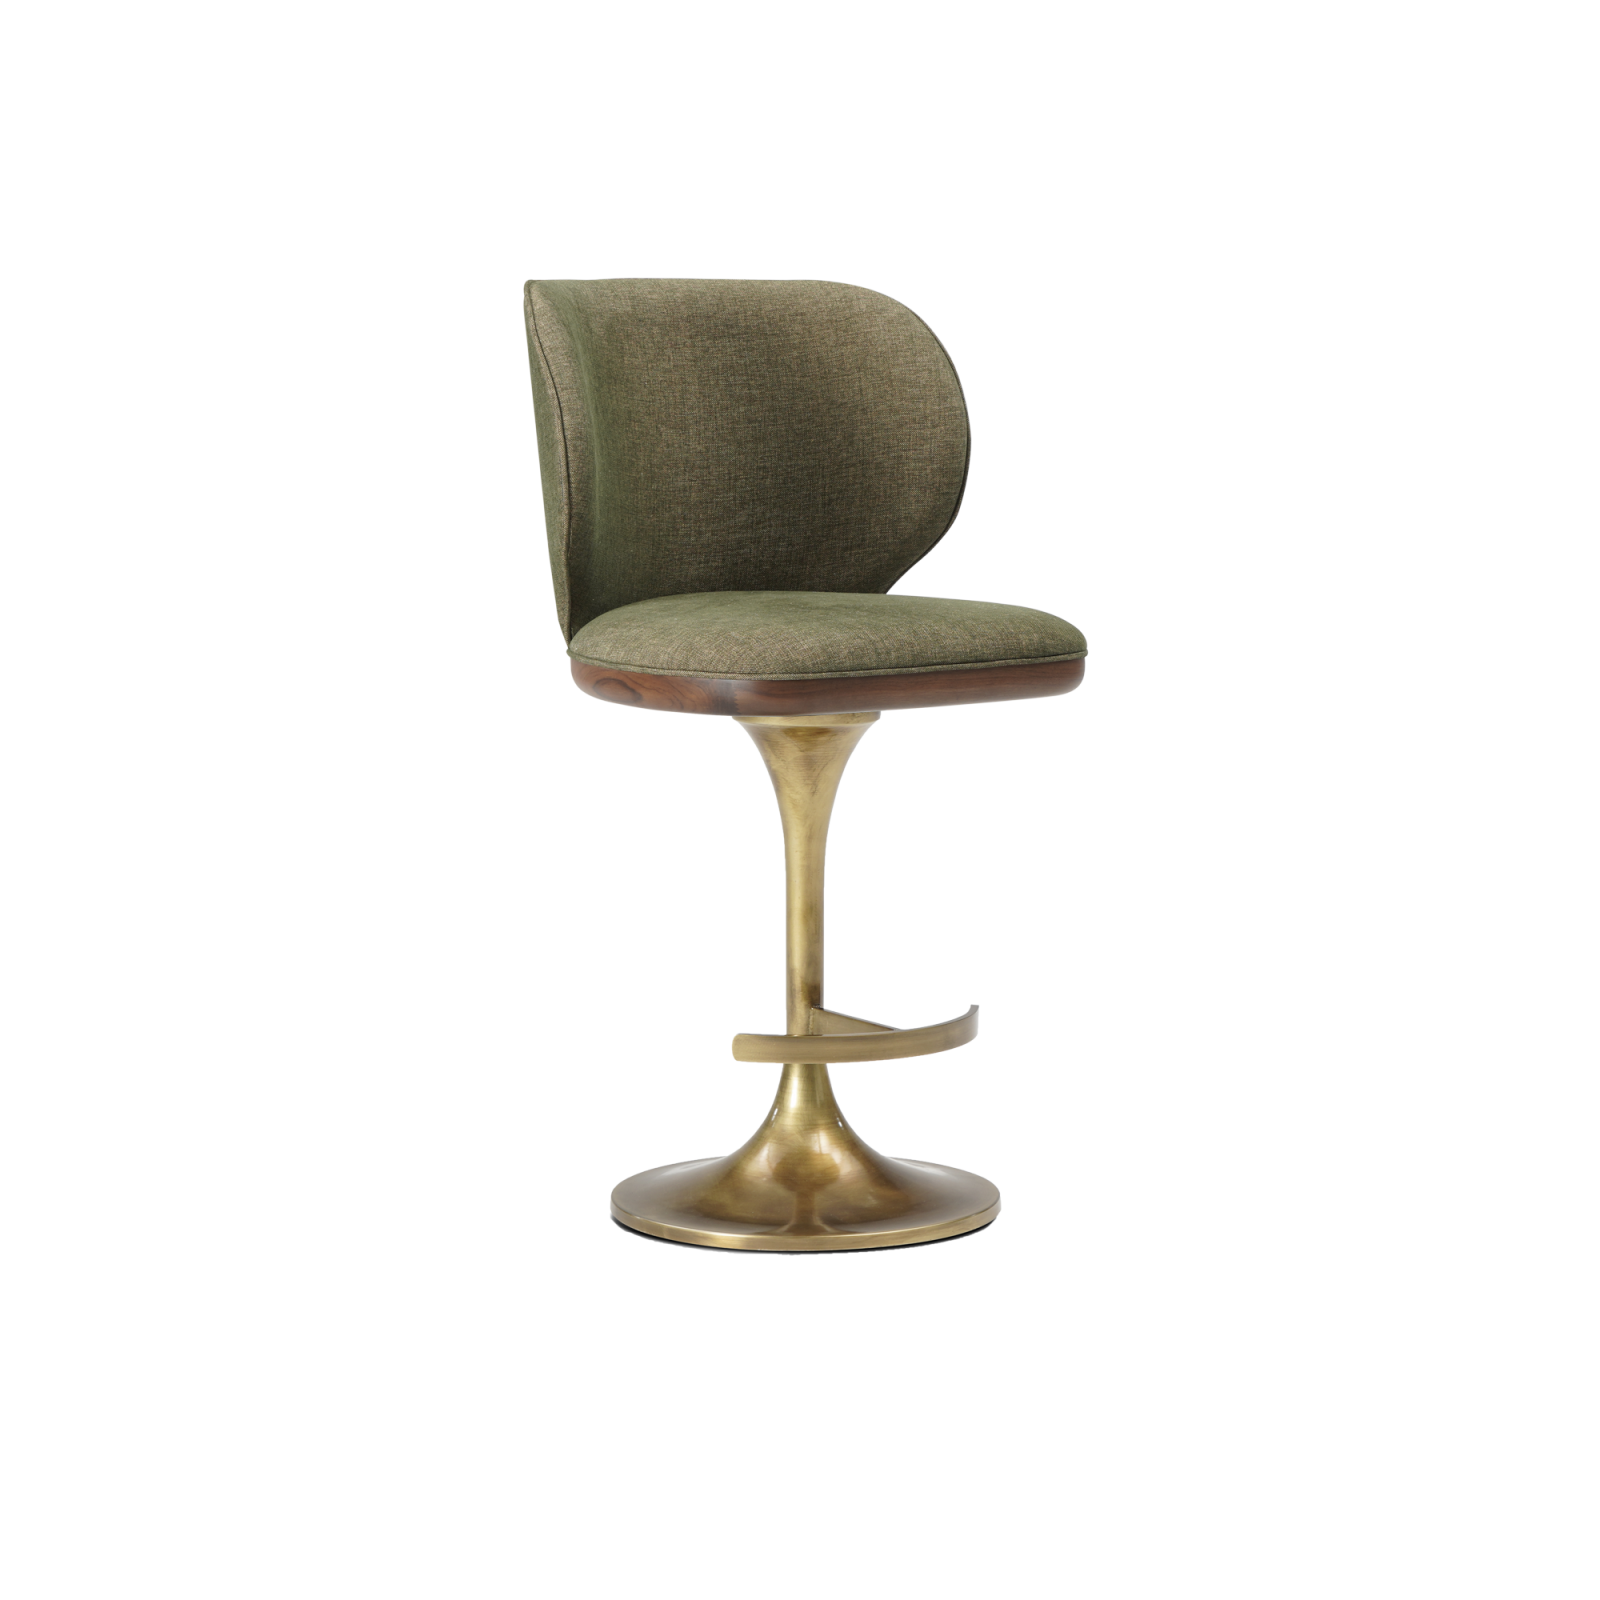 orissa bar chair, consisting of a single gold-colored leg and green colors